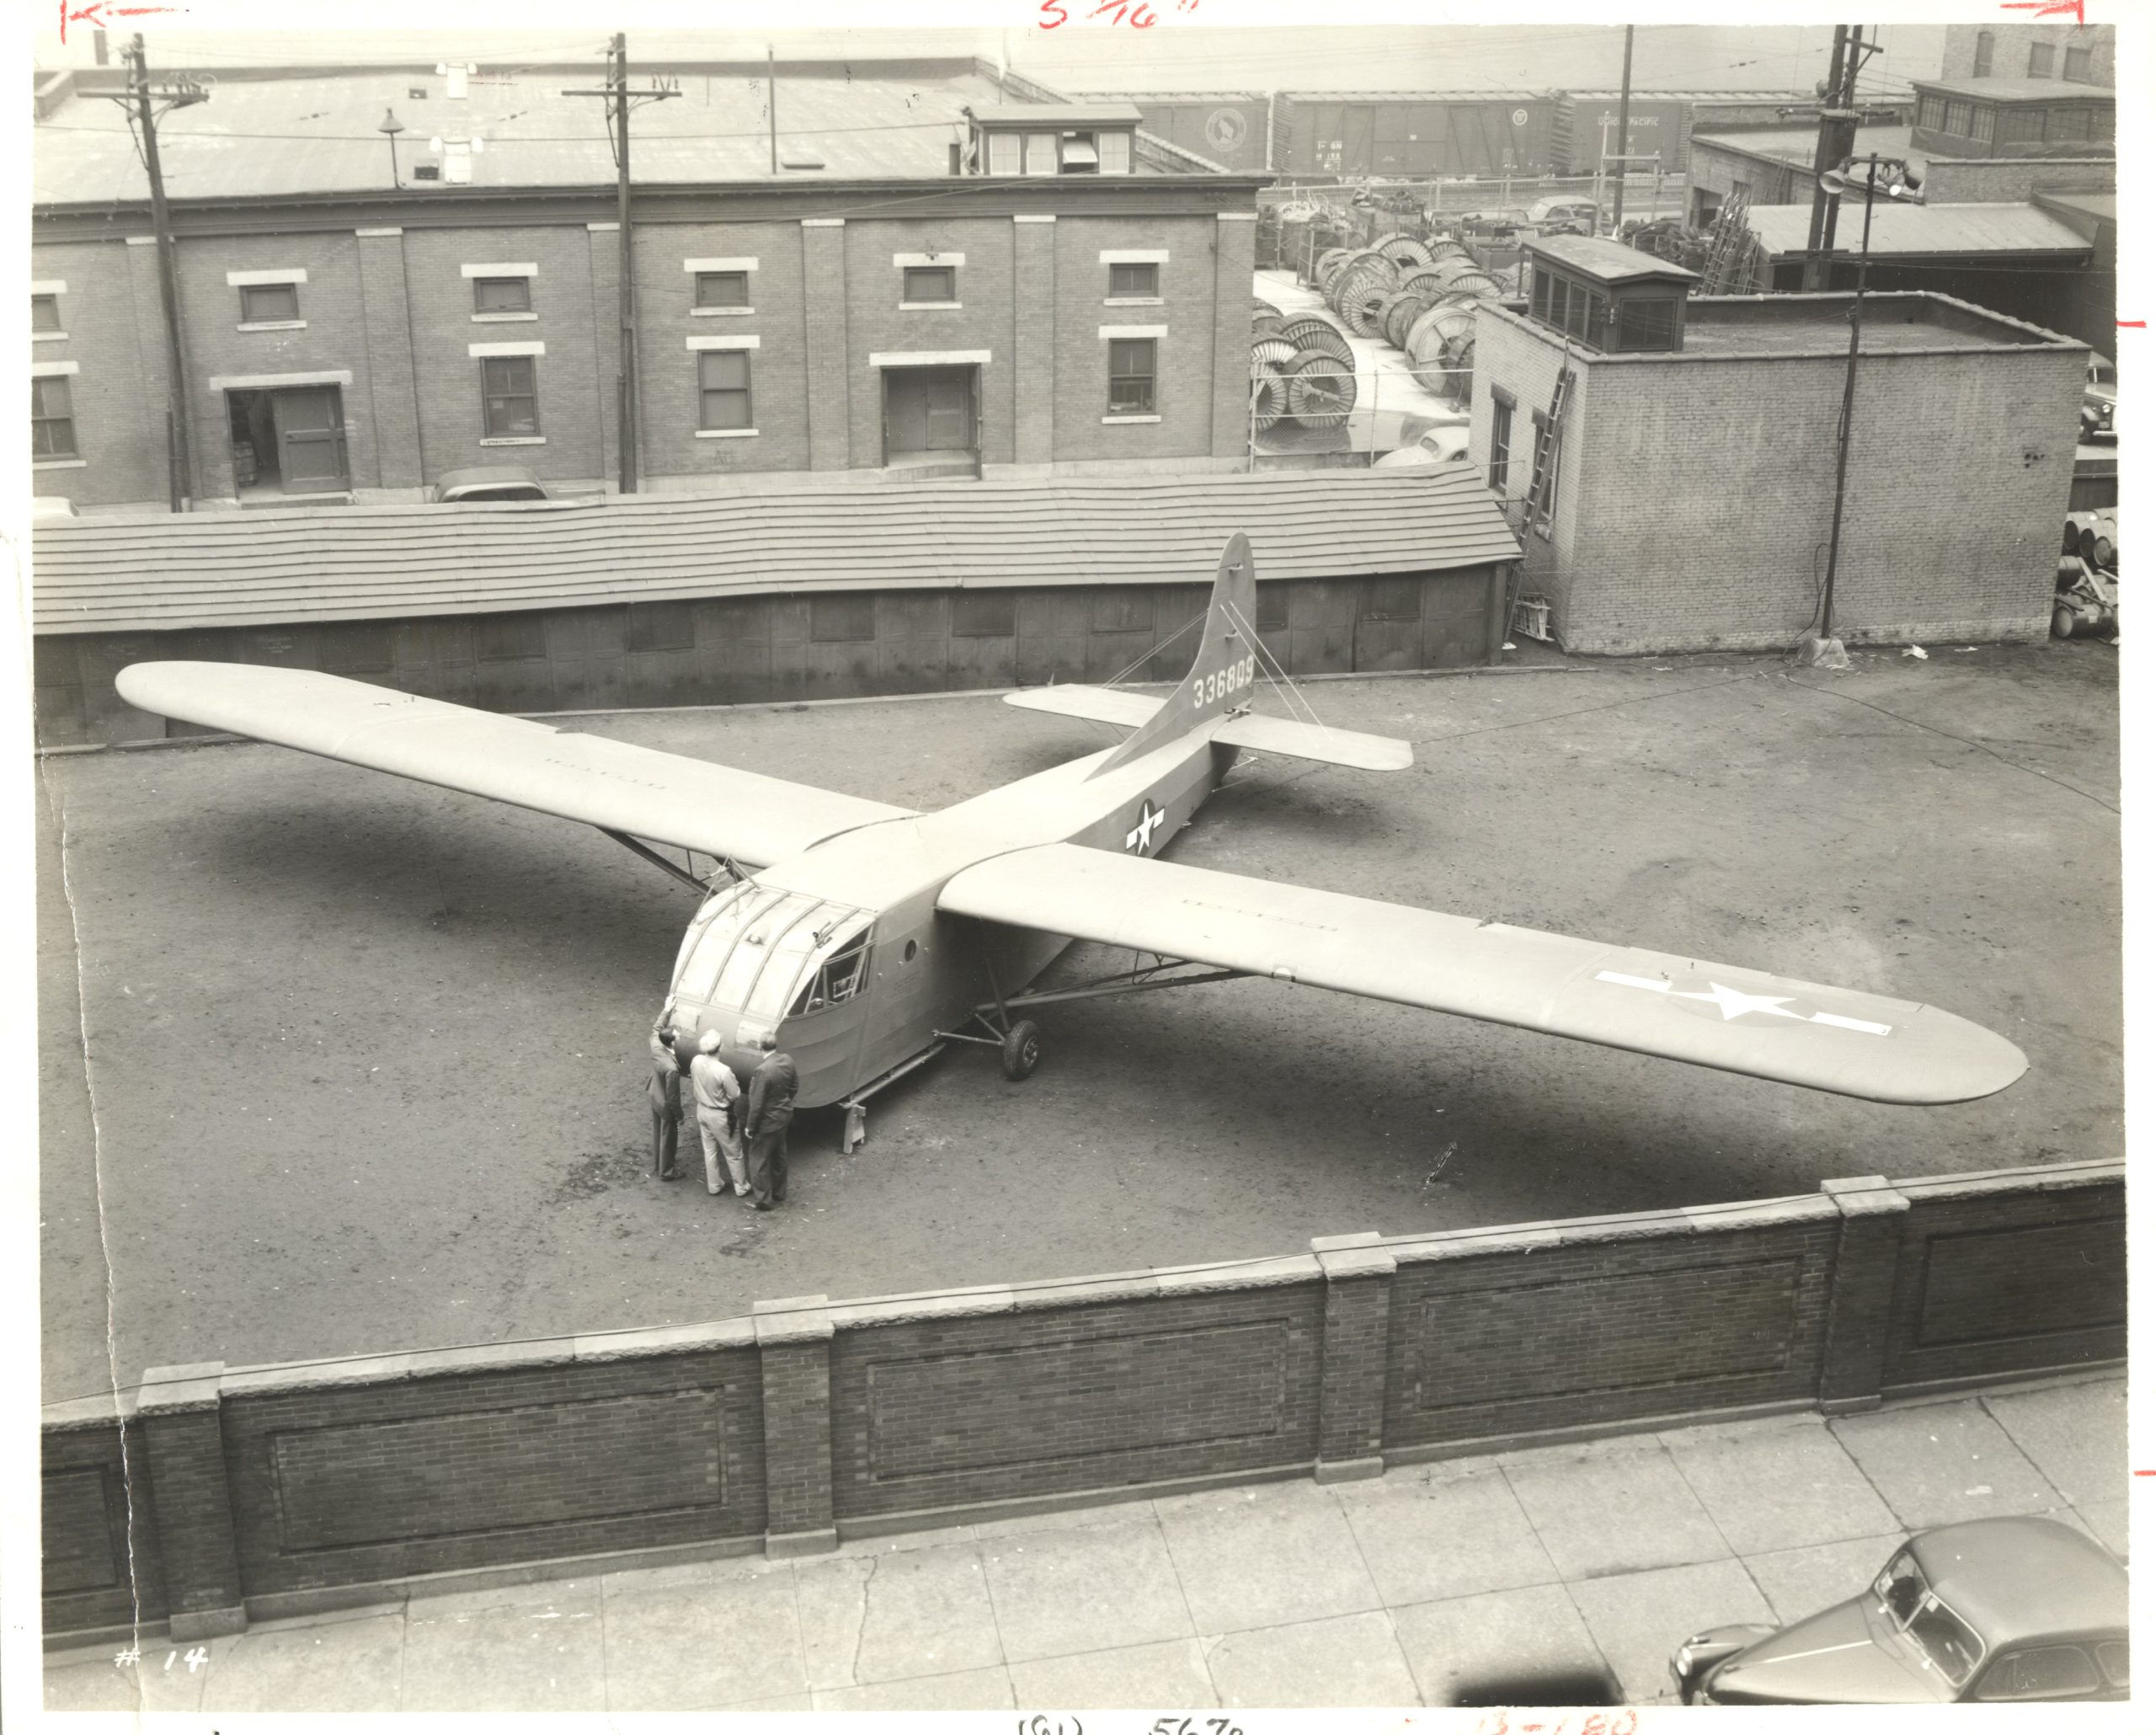 An alternate view of the full glider at Heinz, probably also taken in October 1943.